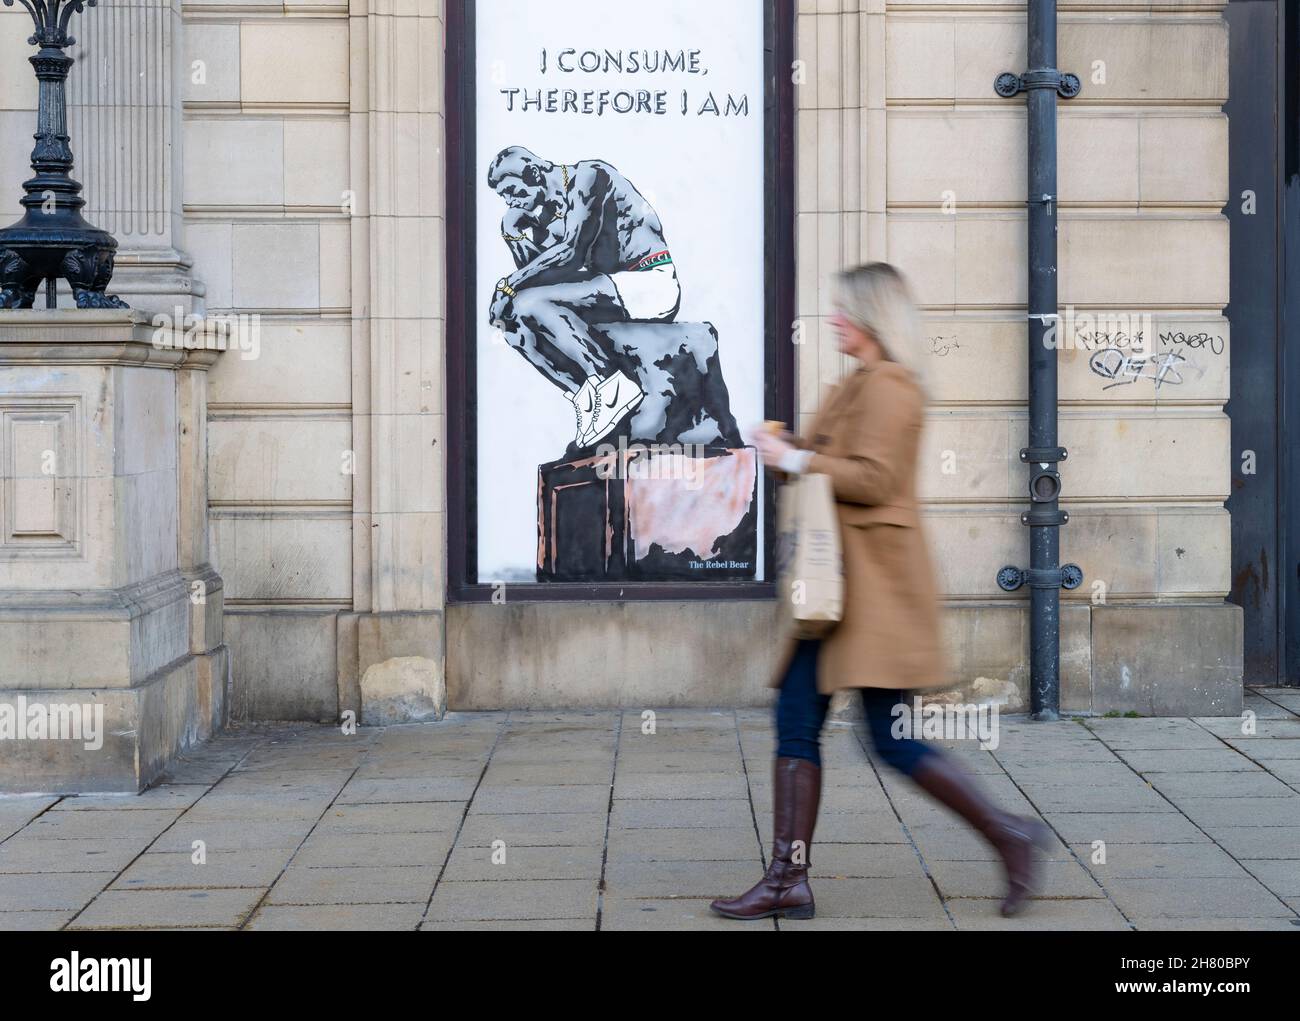 Edinburgh, Scotland, UK. 26th November 2021. On opening day of Black Friday sales new street art by Rebel Bear has appeared in Edinburgh city centre. The street art with the message “I consume therefore I am “ seems to mock the importance of the modern consumerism culture. Iain Masterton/Alamy Live News. Stock Photo